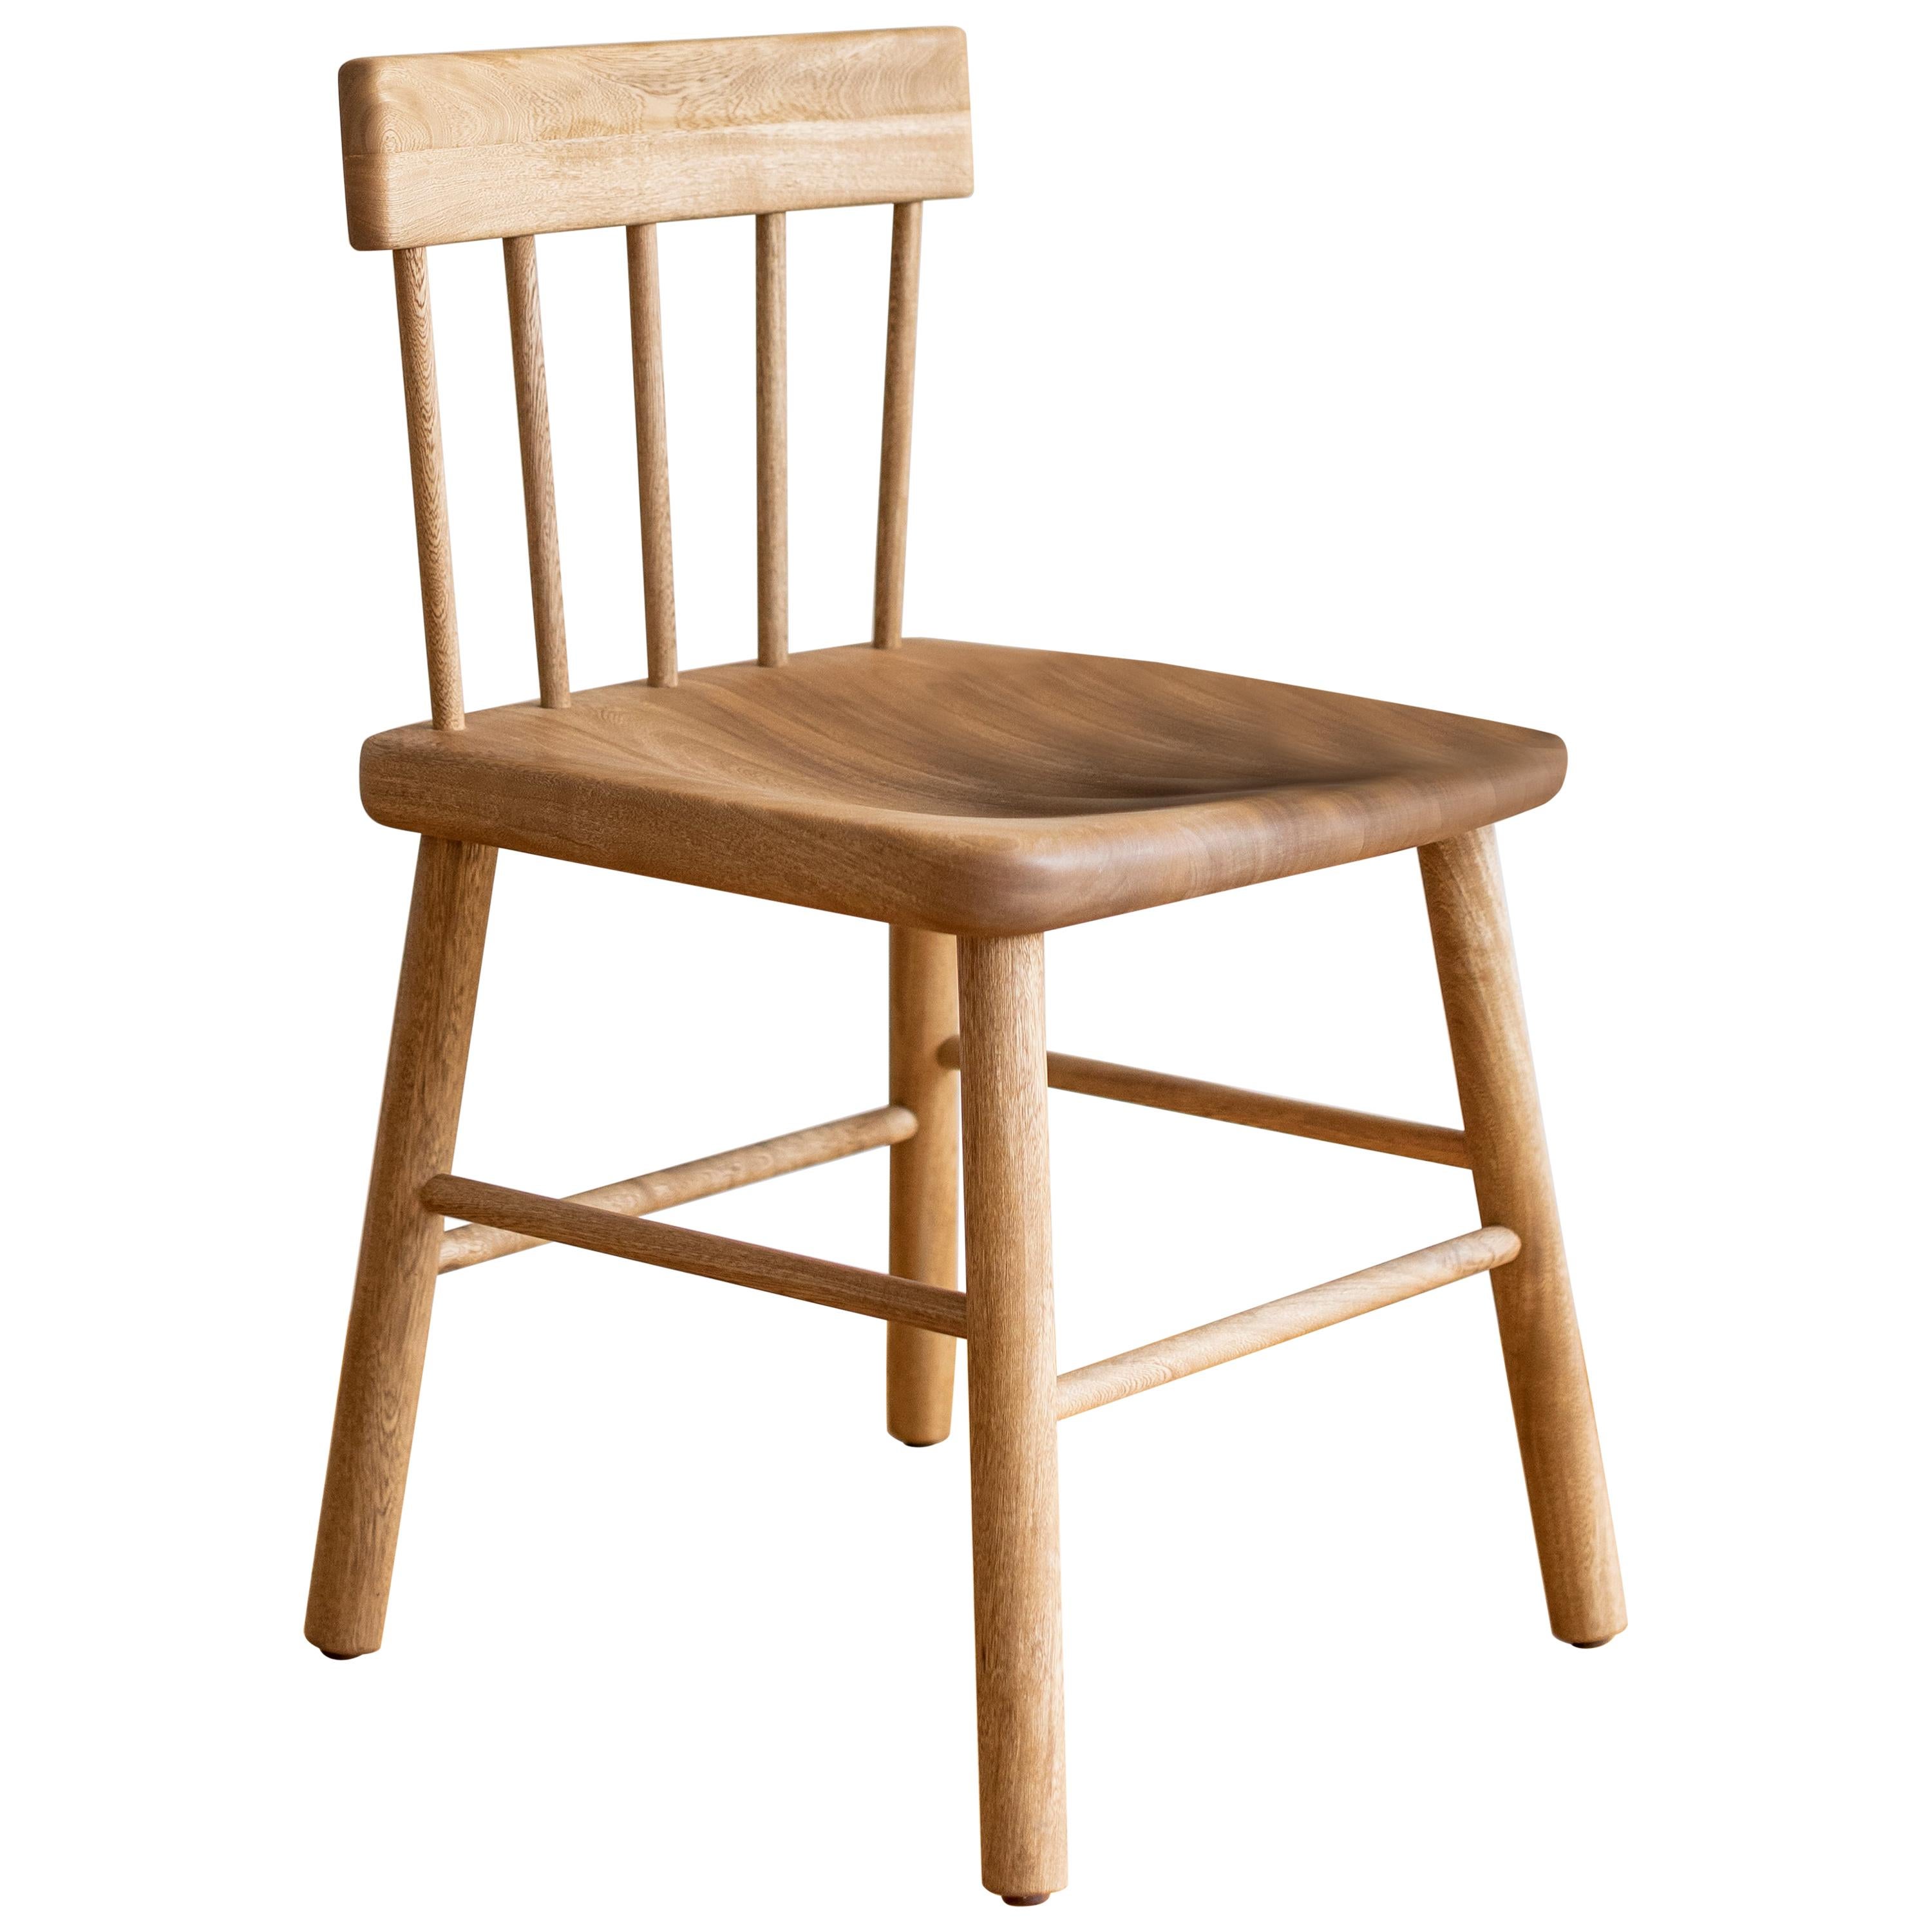 1784 Collection Wooden Chair For Sale